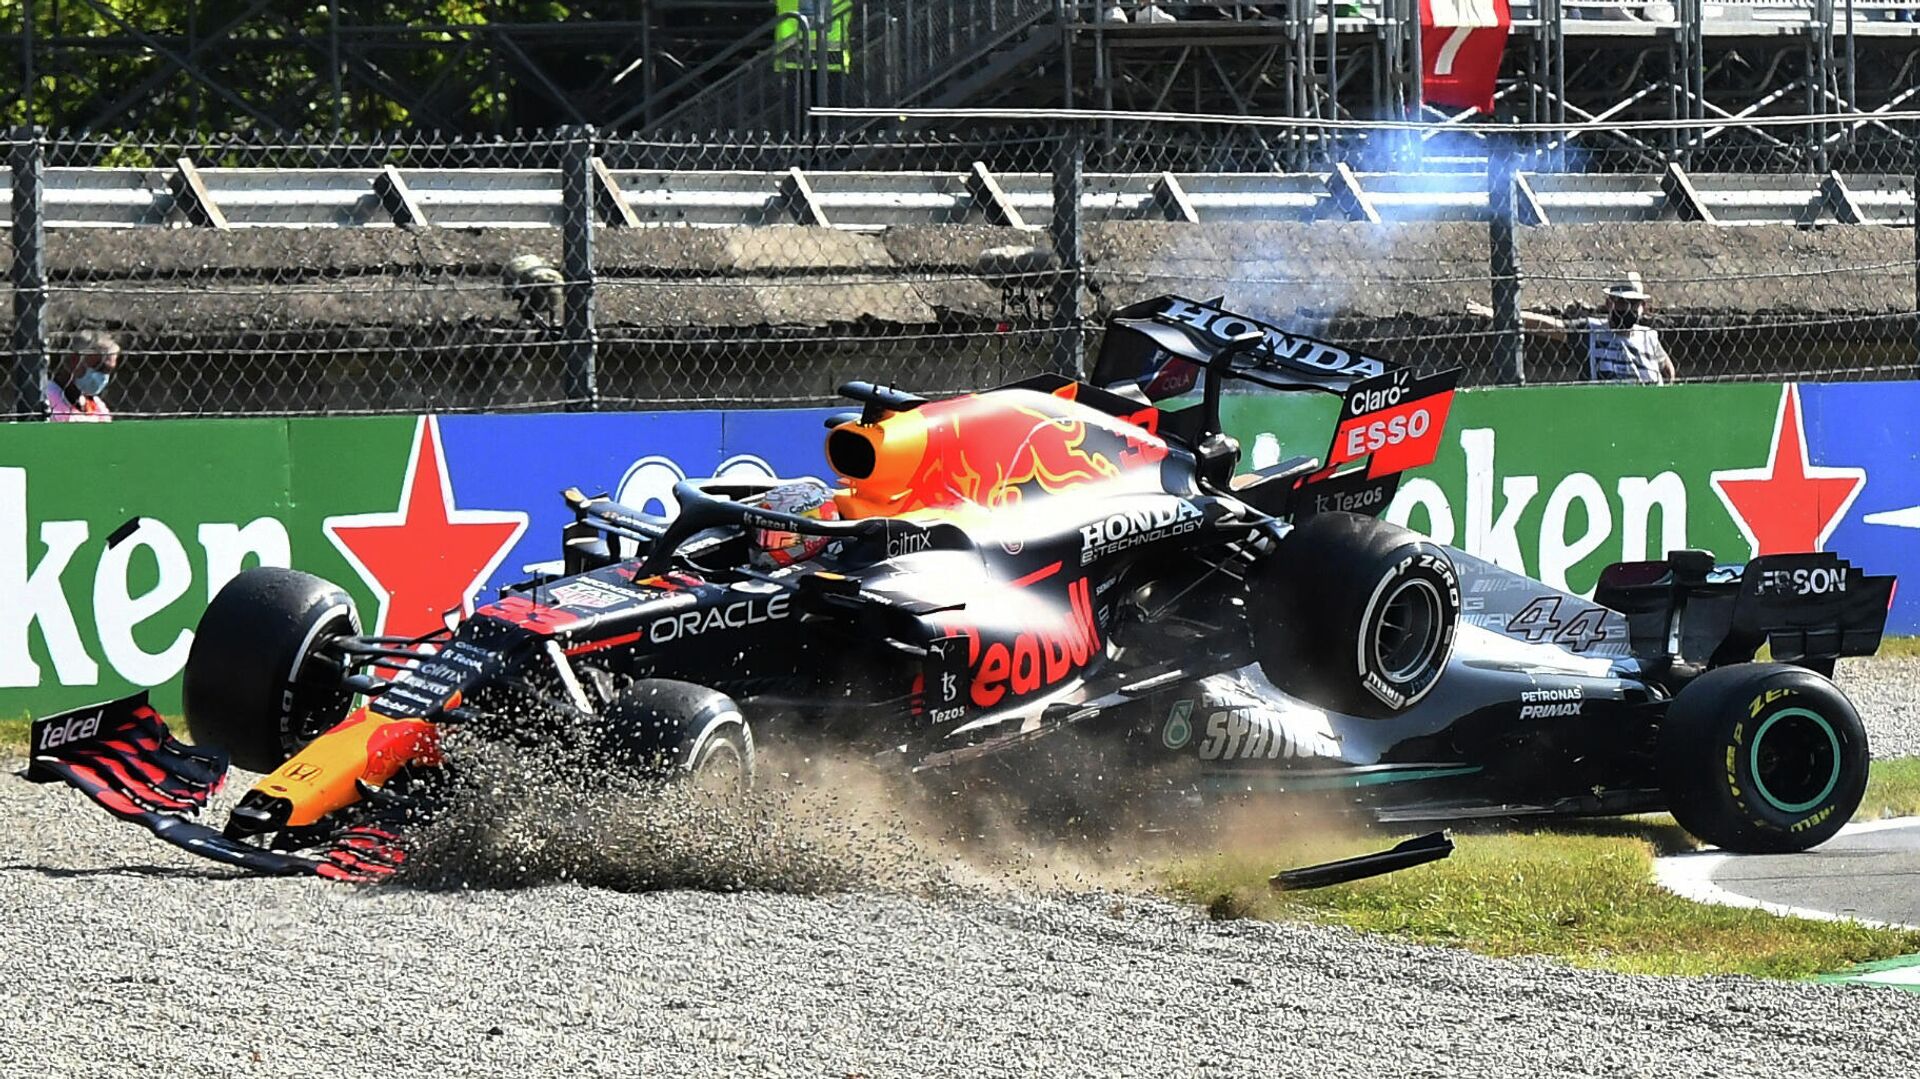  Red Bull's Max Verstappen and Mercedes' Lewis Hamilton crash out of the race  - Sputnik International, 1920, 16.09.2021